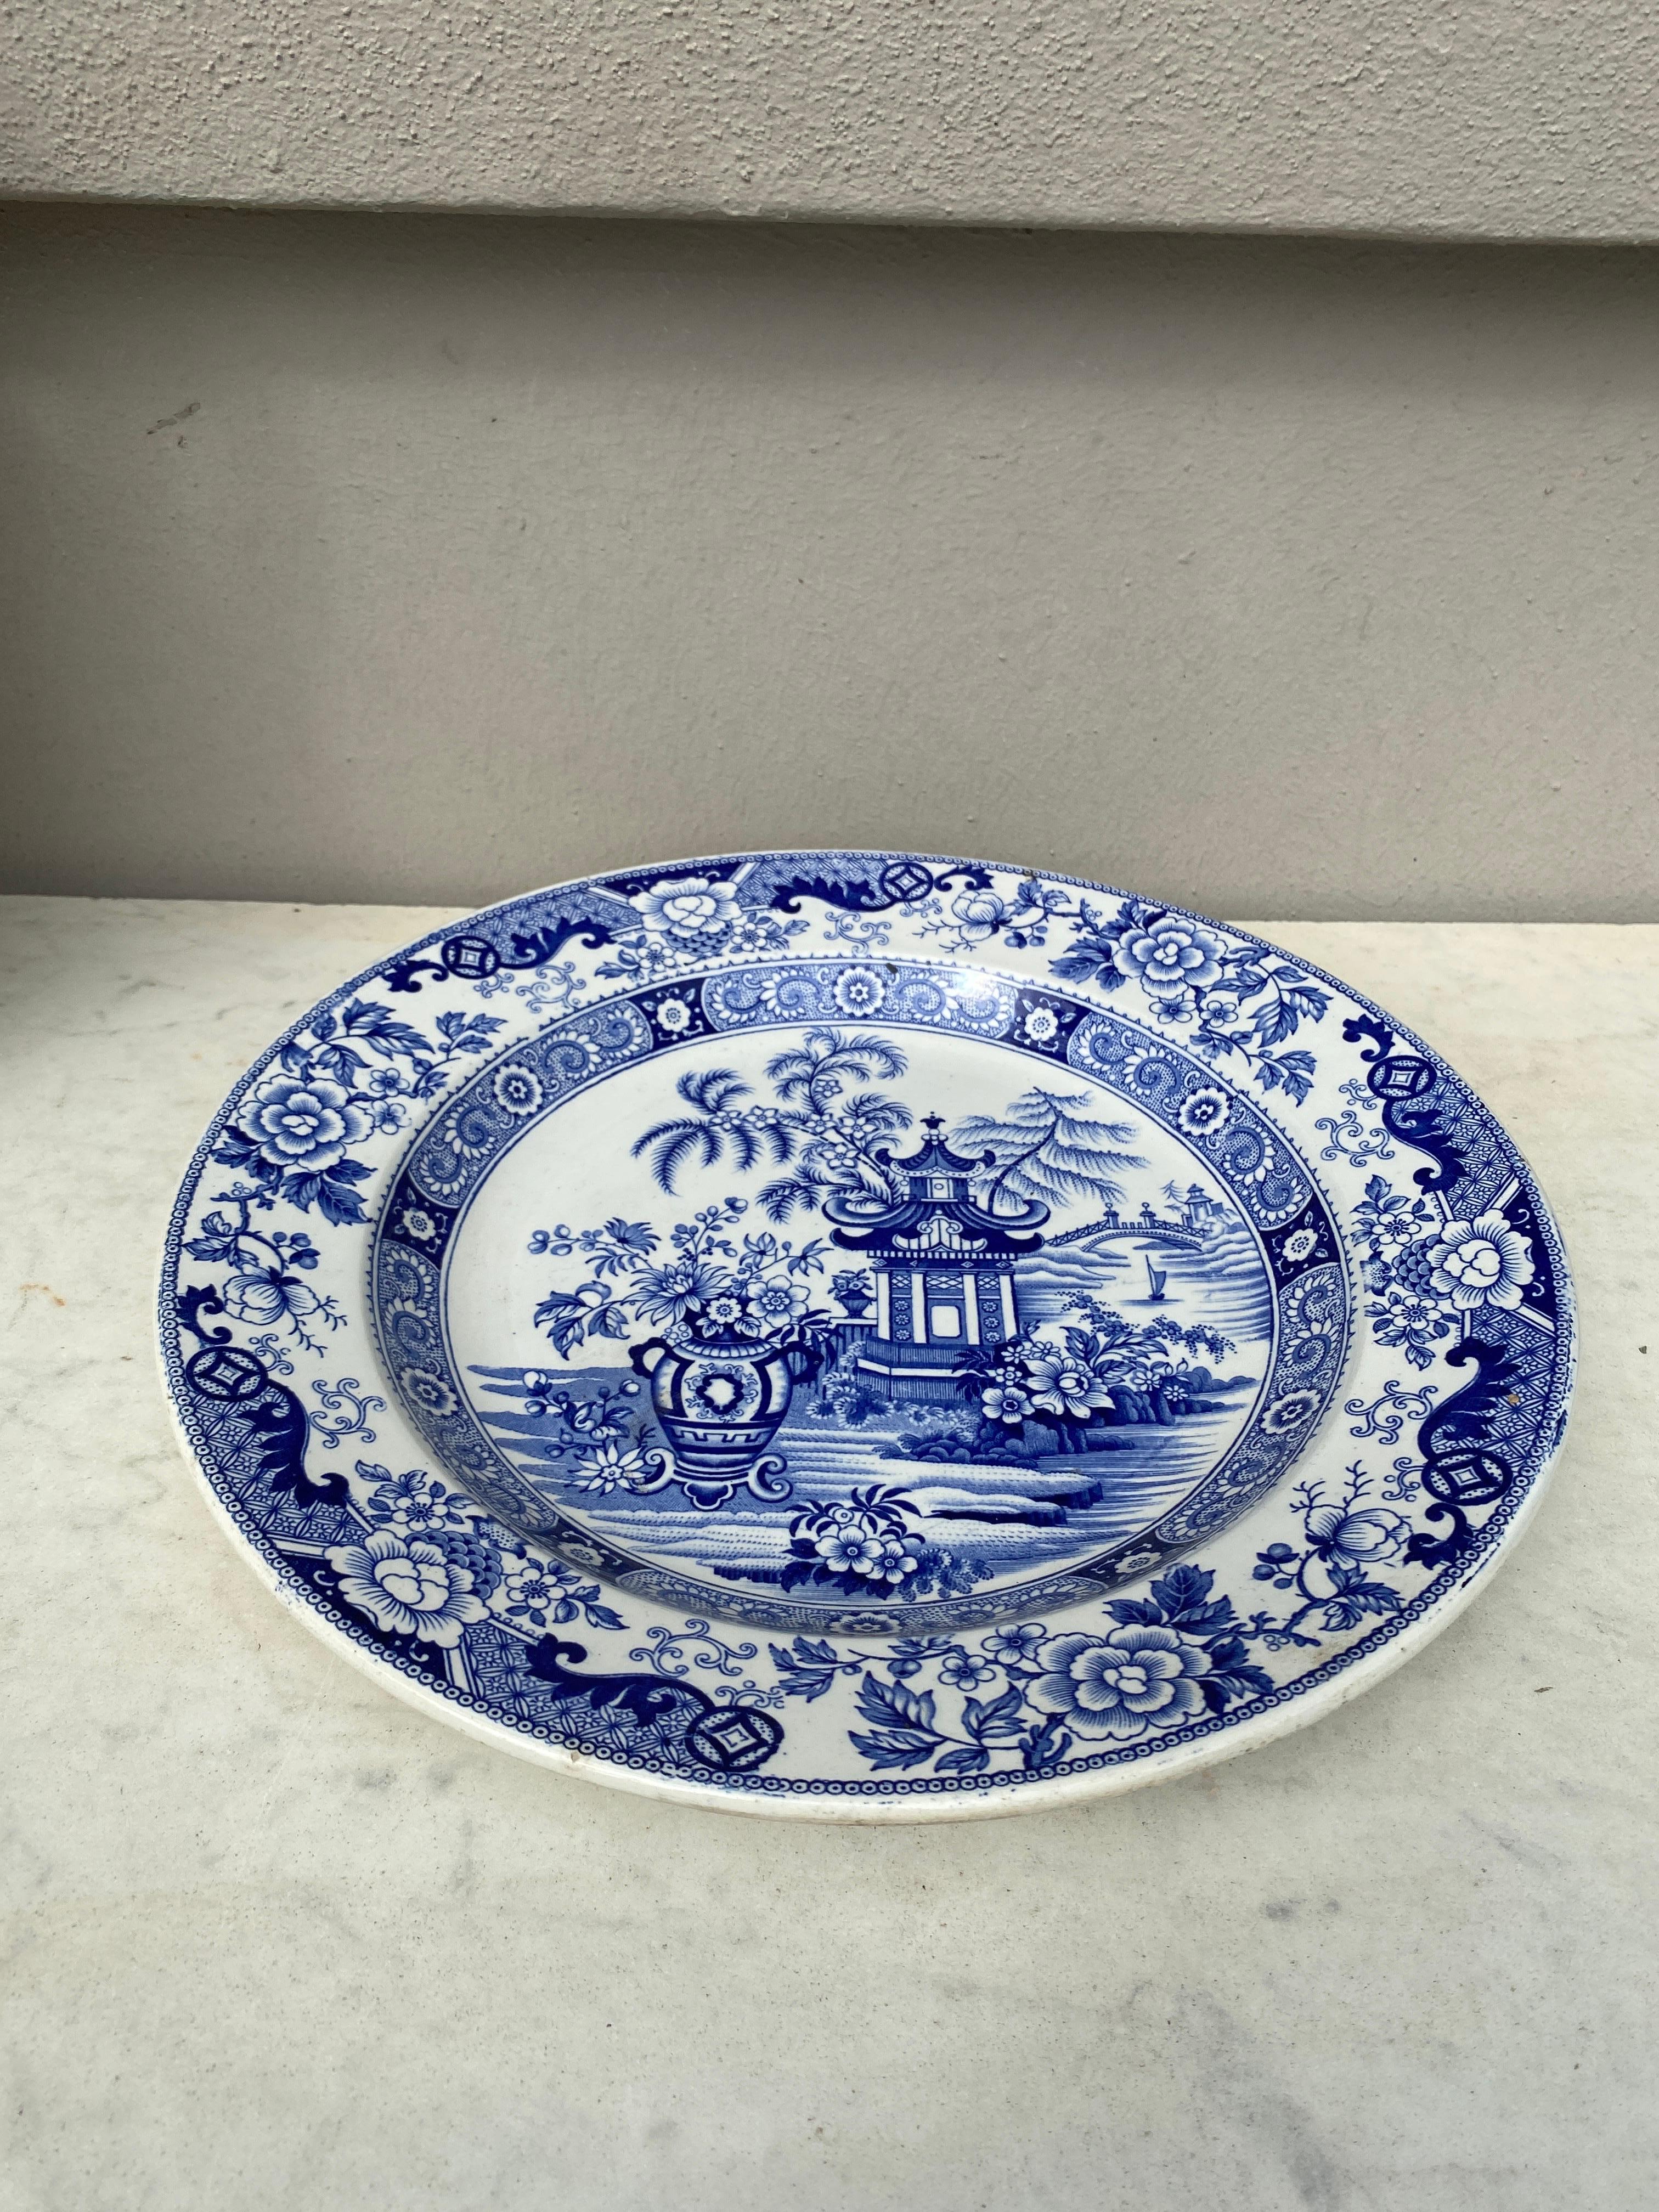 19th Century French blue & white chinoiserie platter Creil et Montereau.
Model Pagoda.
12 inches.